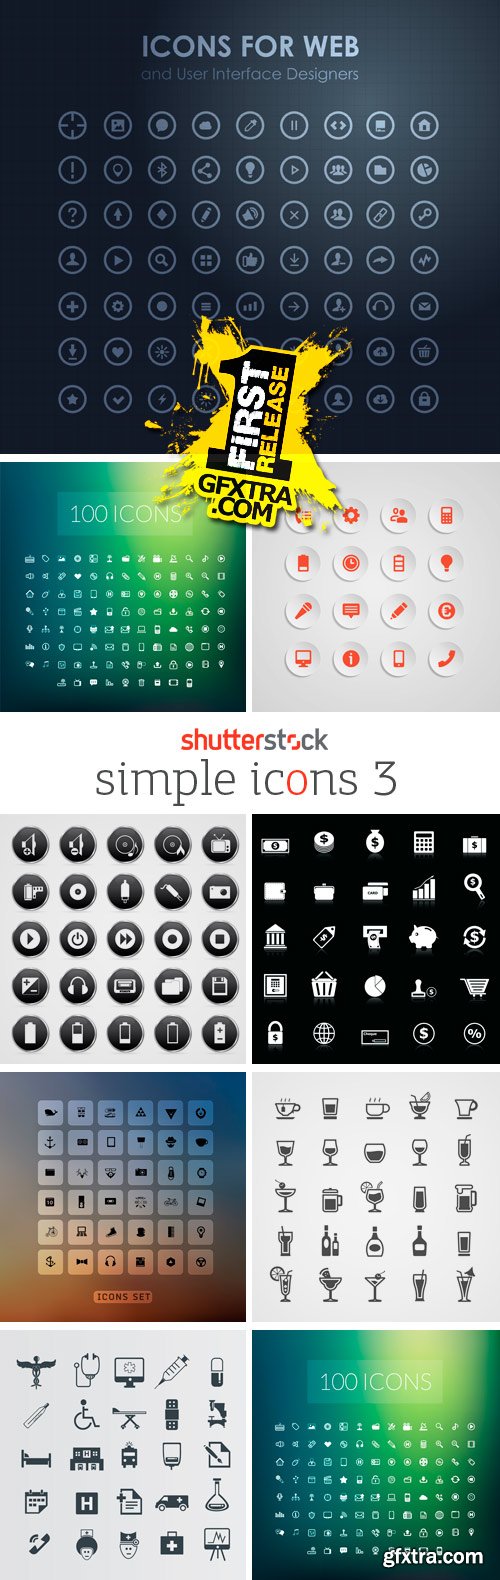 Simple Icons 3, 25xEPS